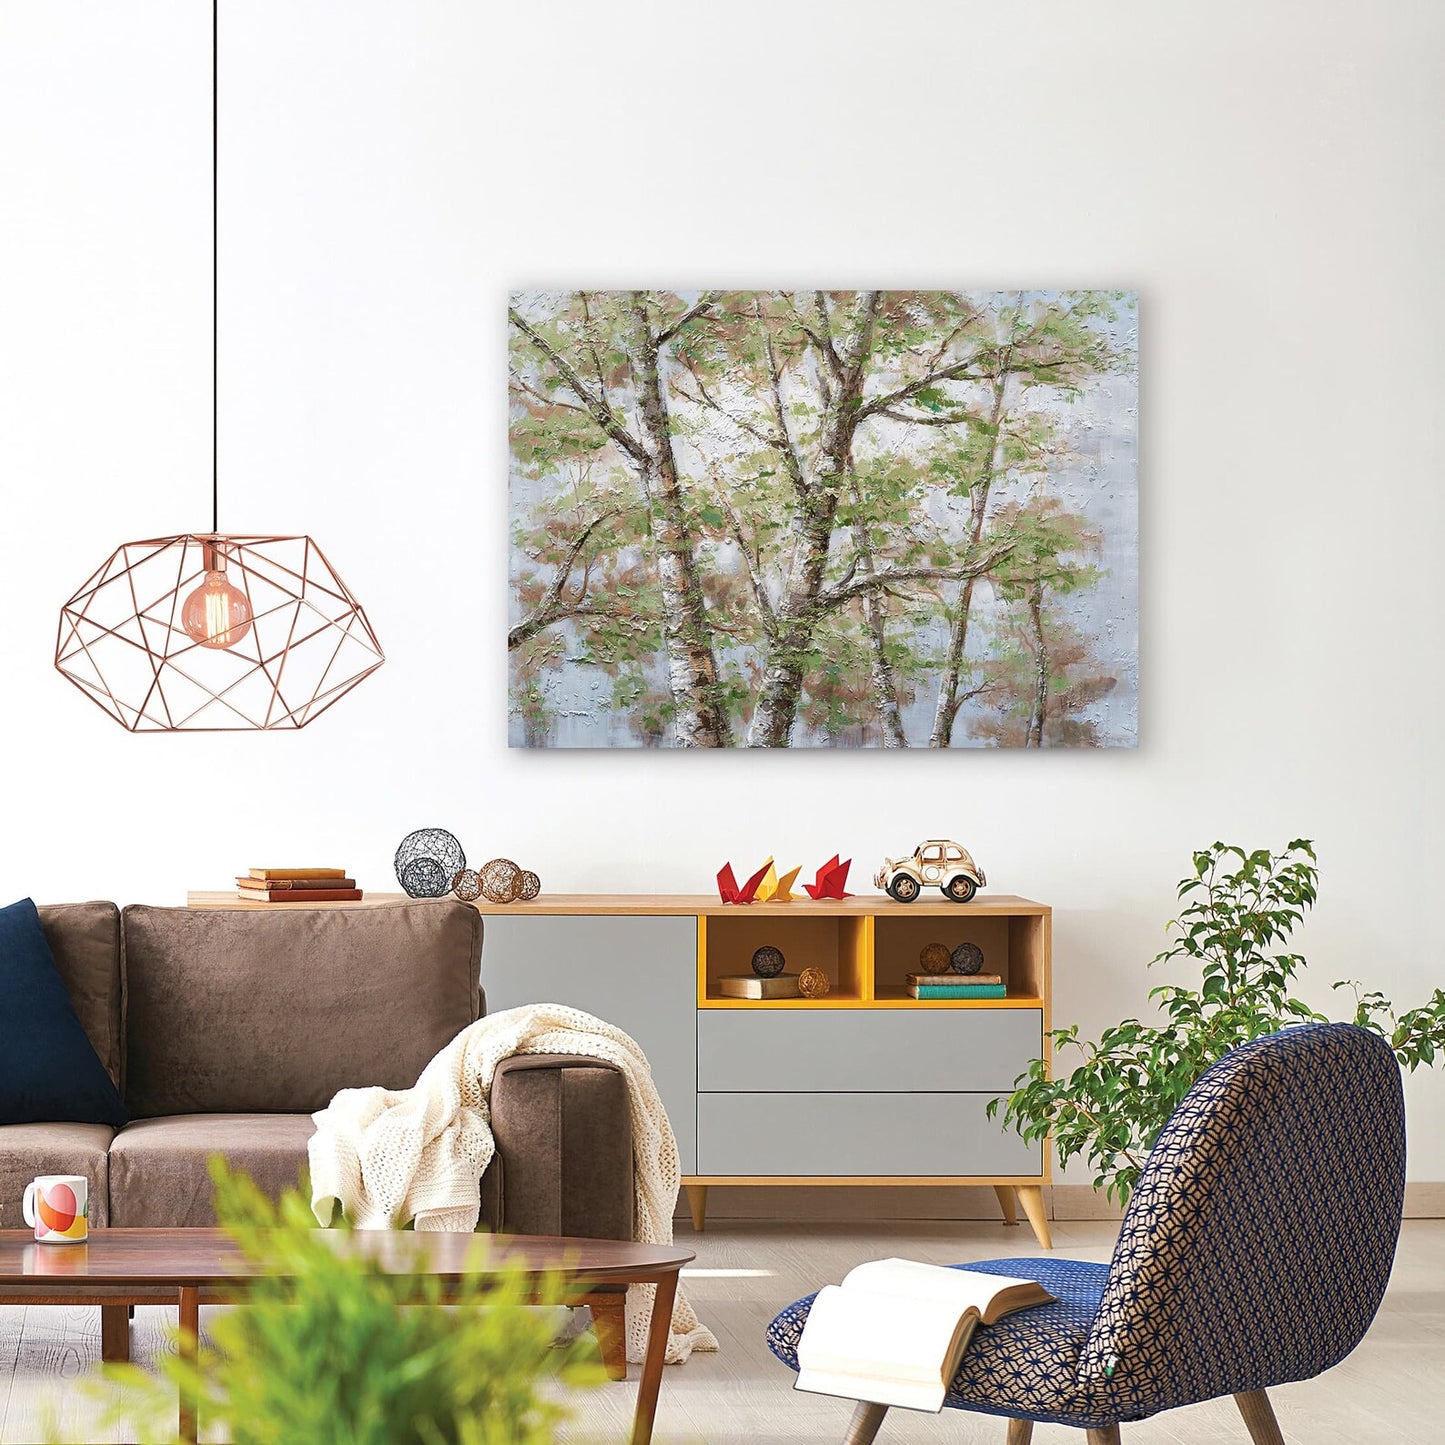 Original "Spring Tree" oil painting on canvas, wrapped canvas art for living room, bedroom, and office.